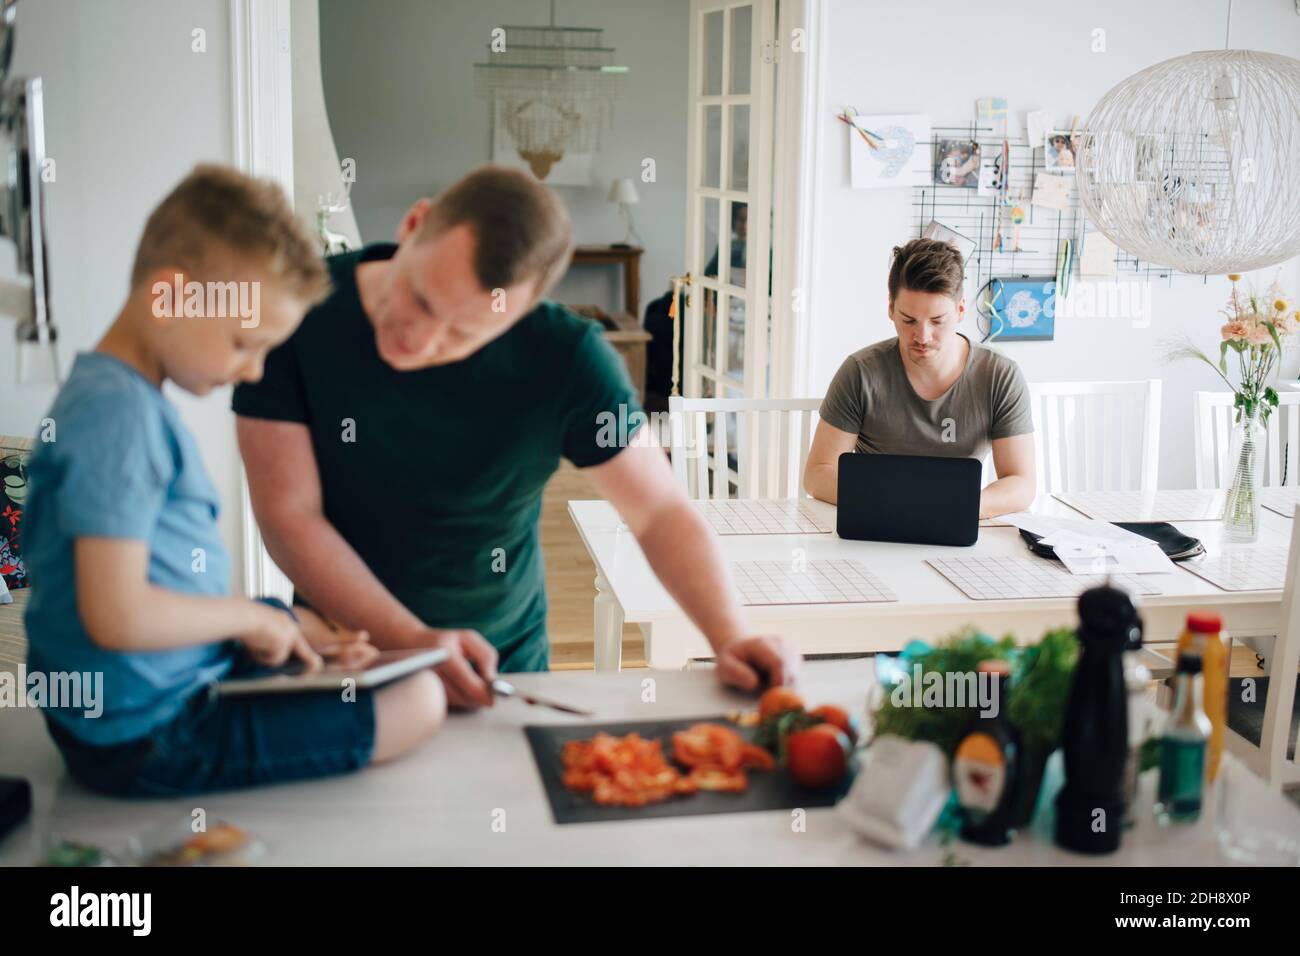 Man using laptop dining table while father and son looking at digital tablet on kitchen counter Stock Photo